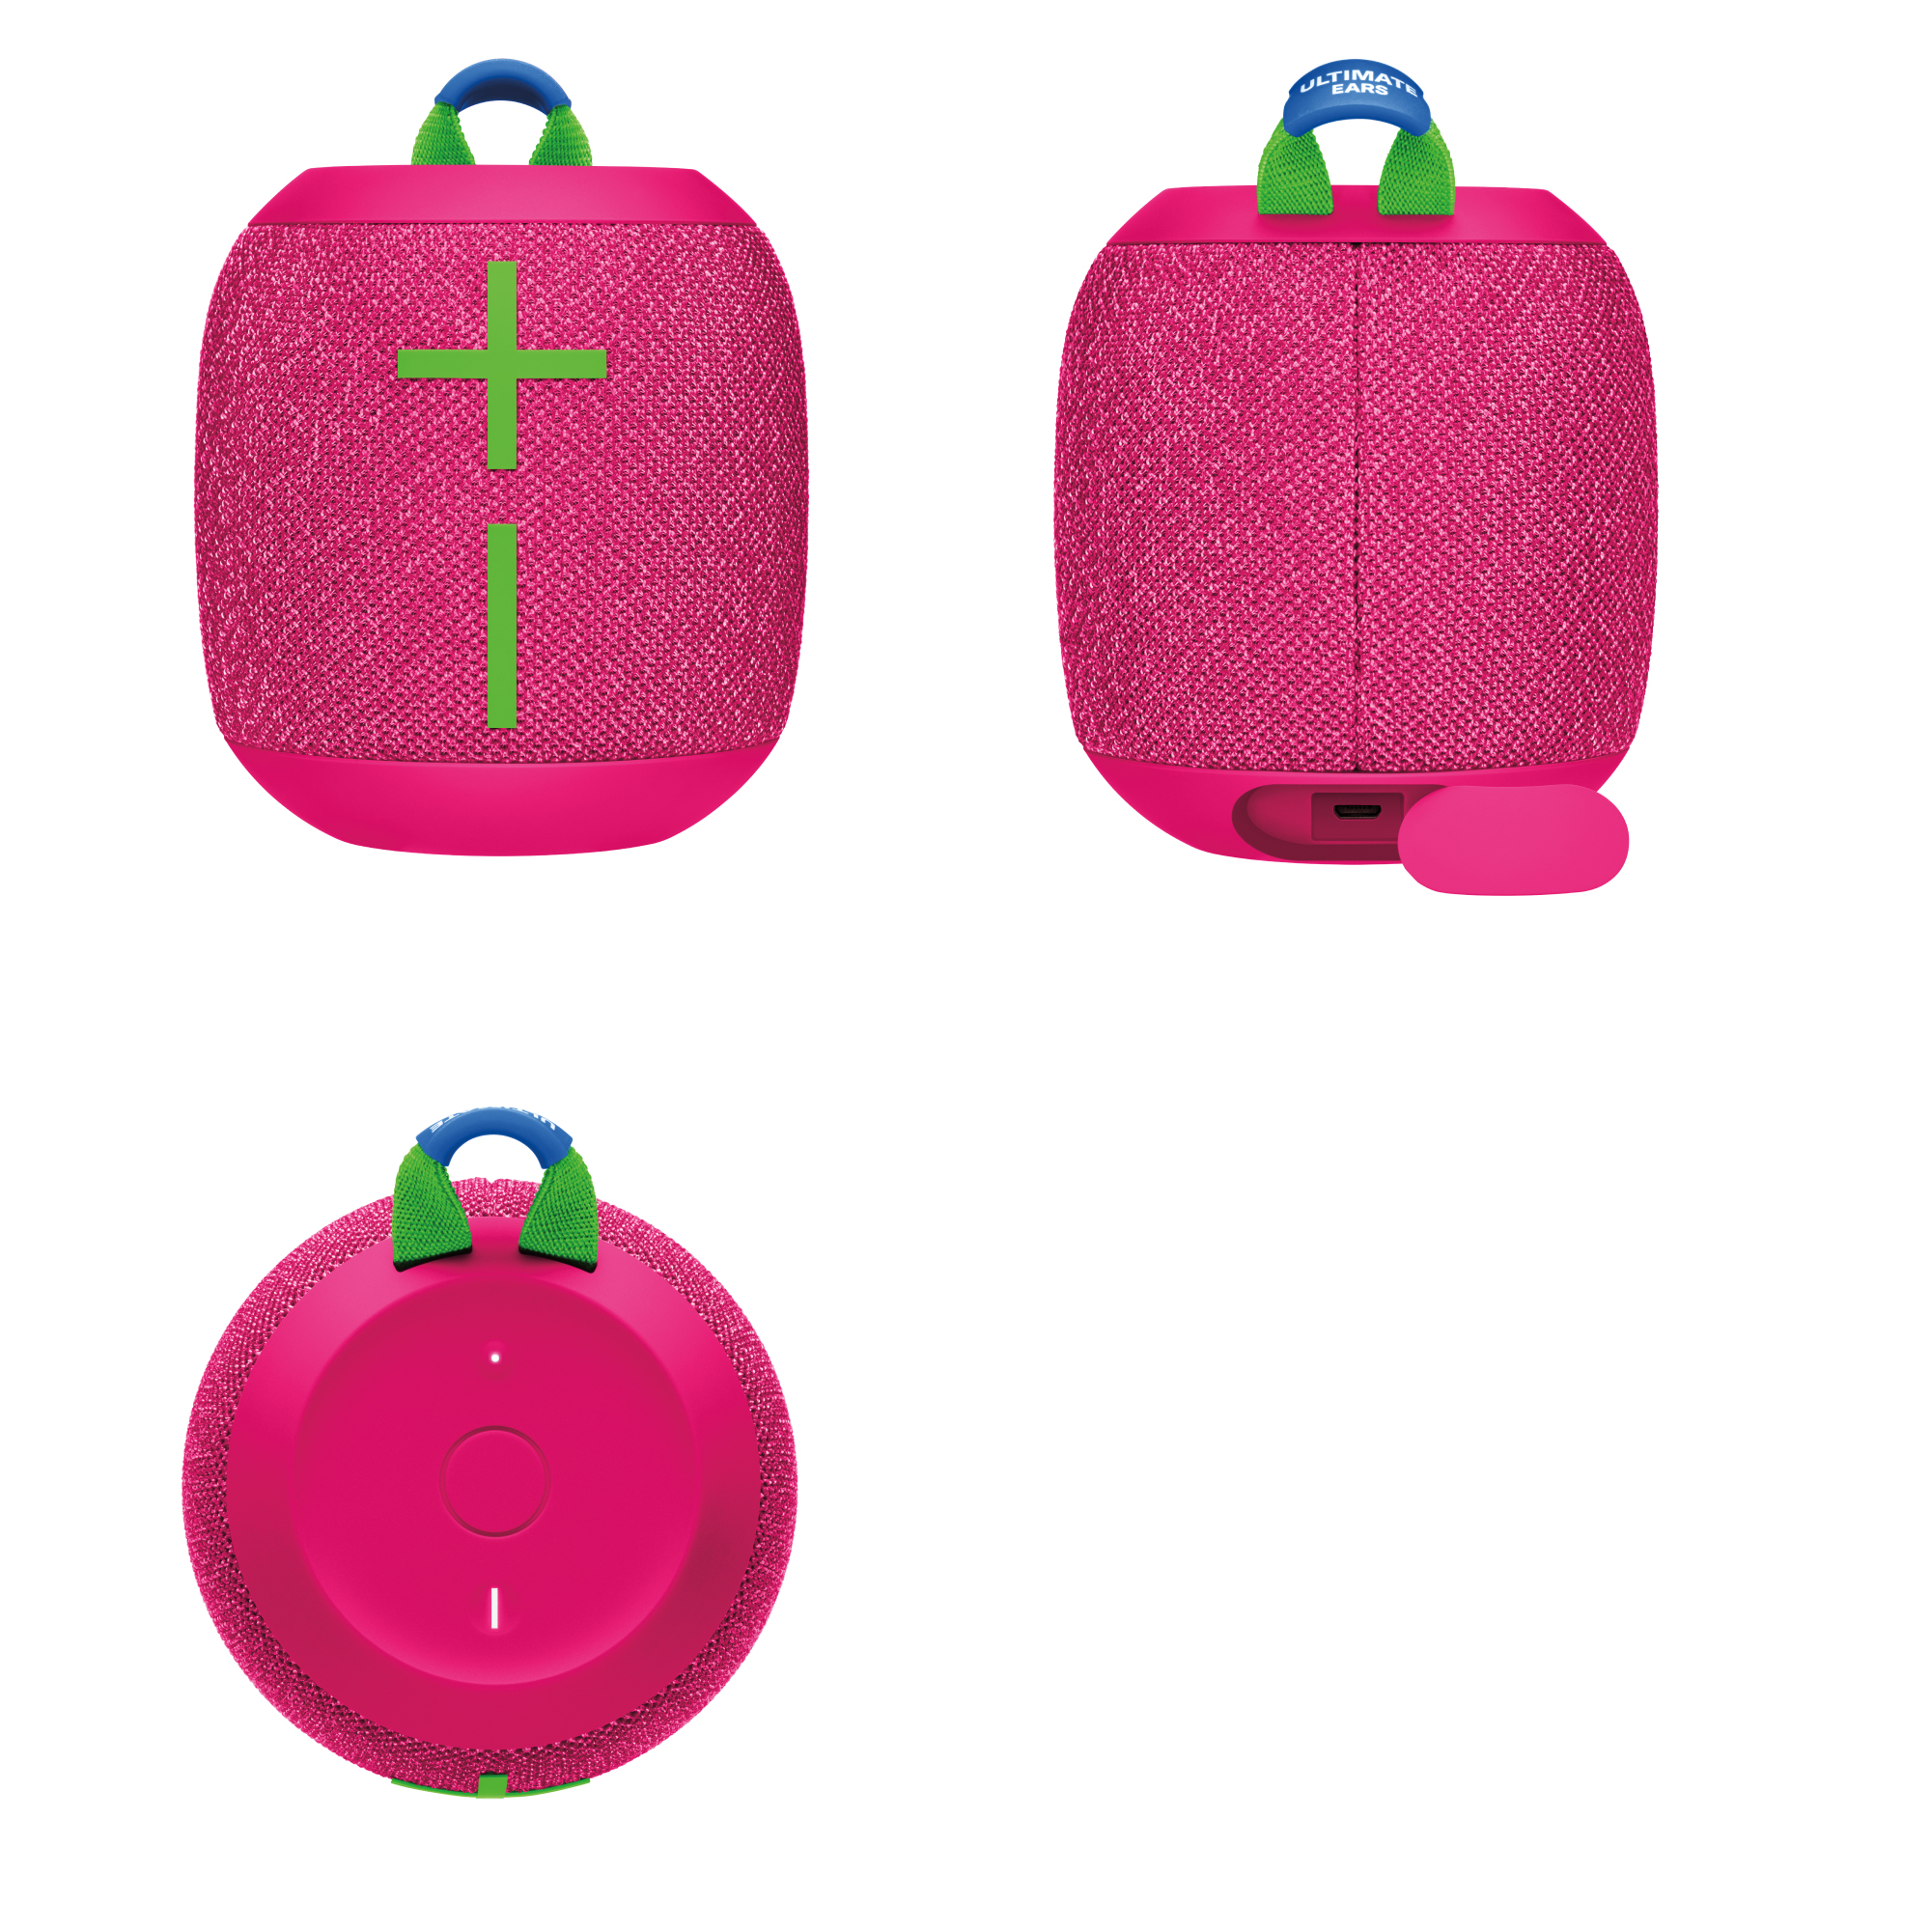 Ultimate Ears WONDERBOOM 3 Speaker (Hyper Pink) with Case, Cable and Adapter